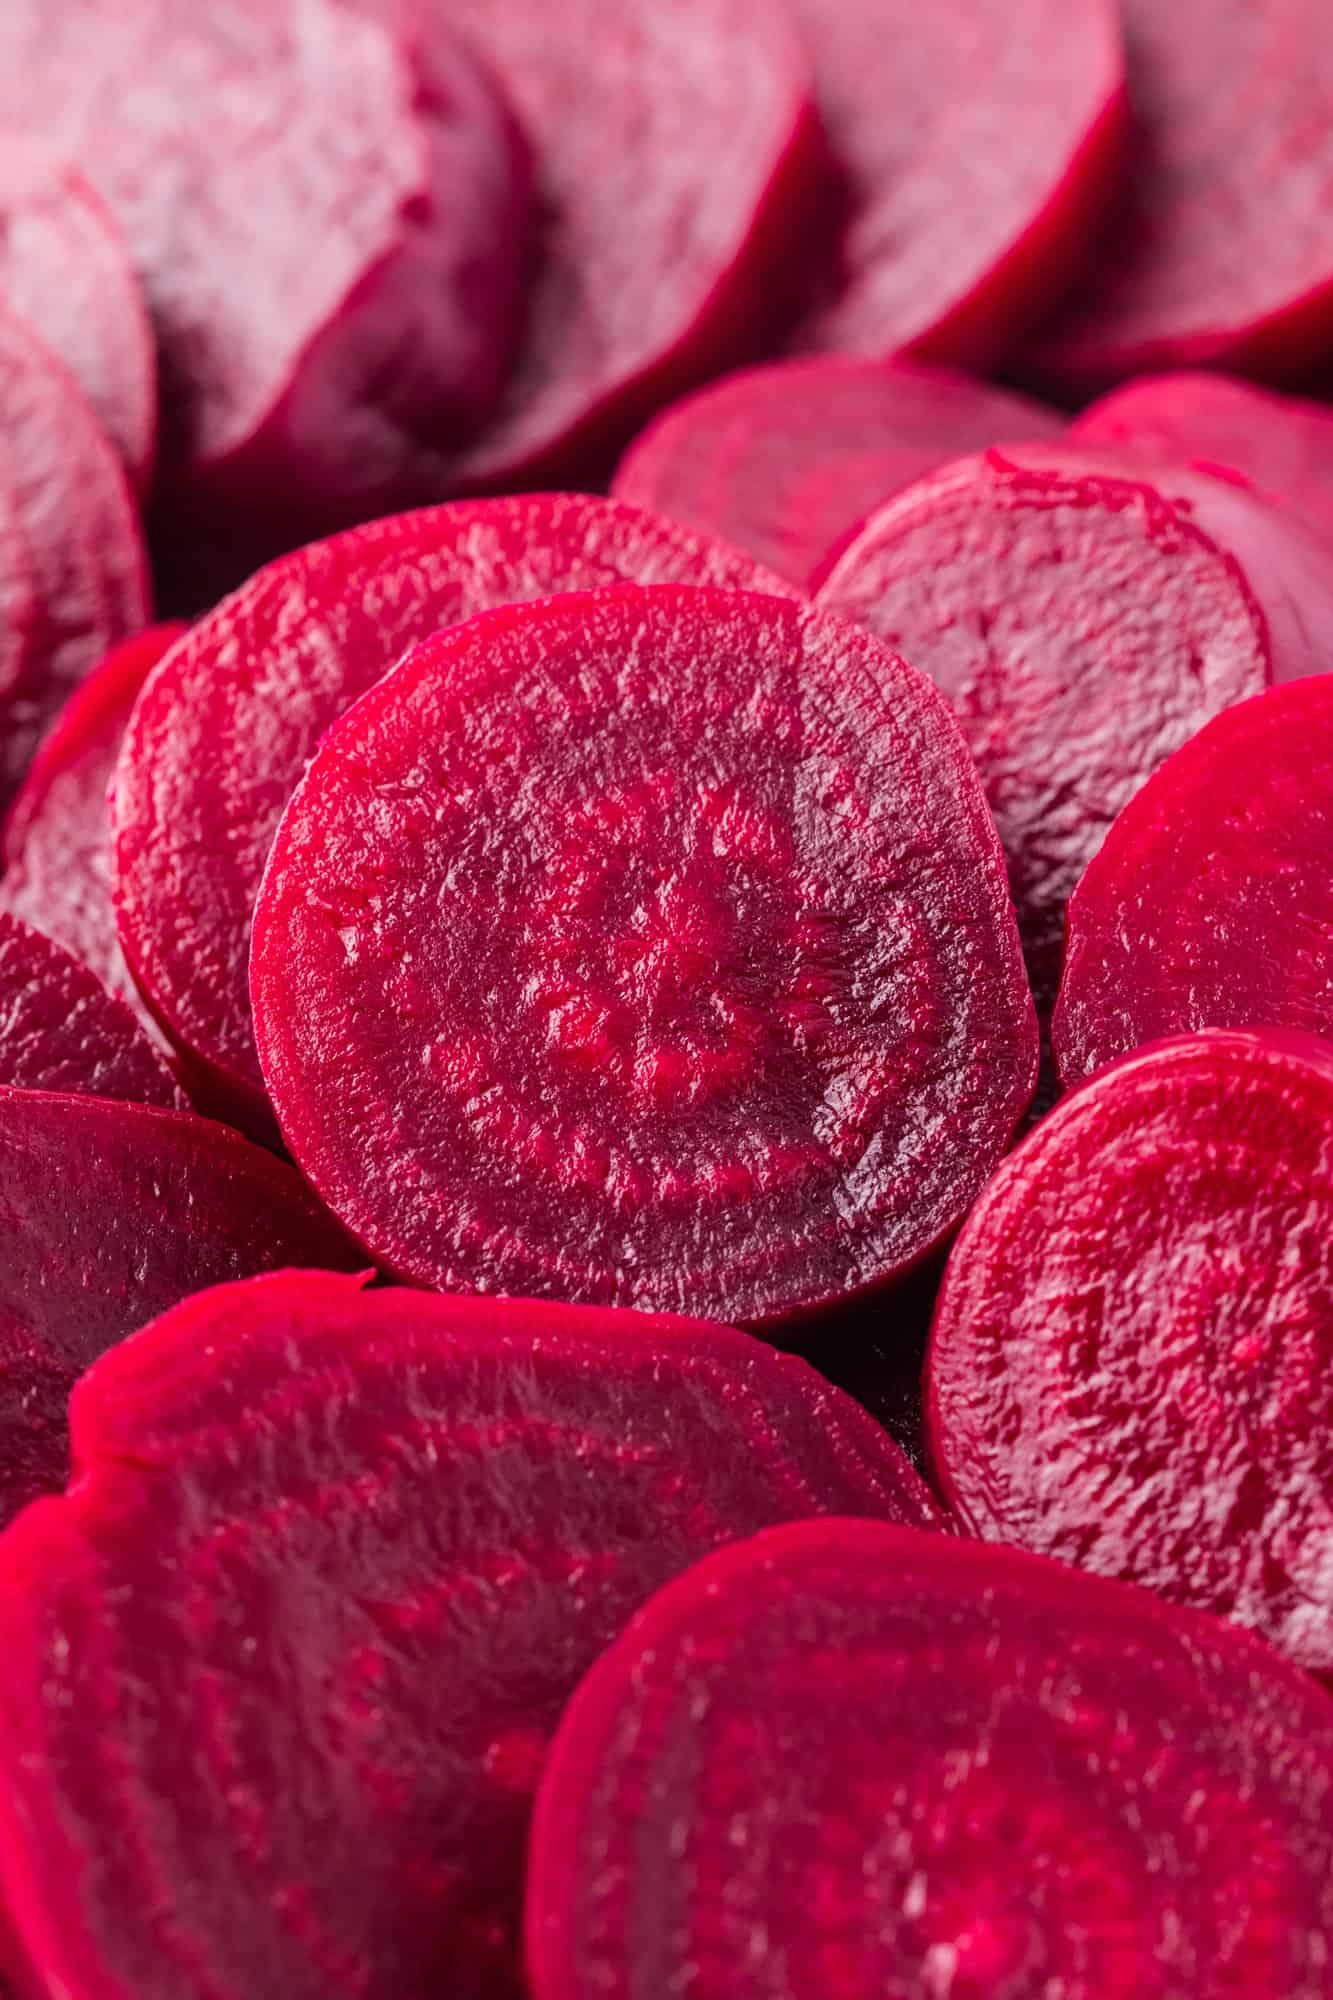 Boiled beets, cut into slices, a deep pink color.